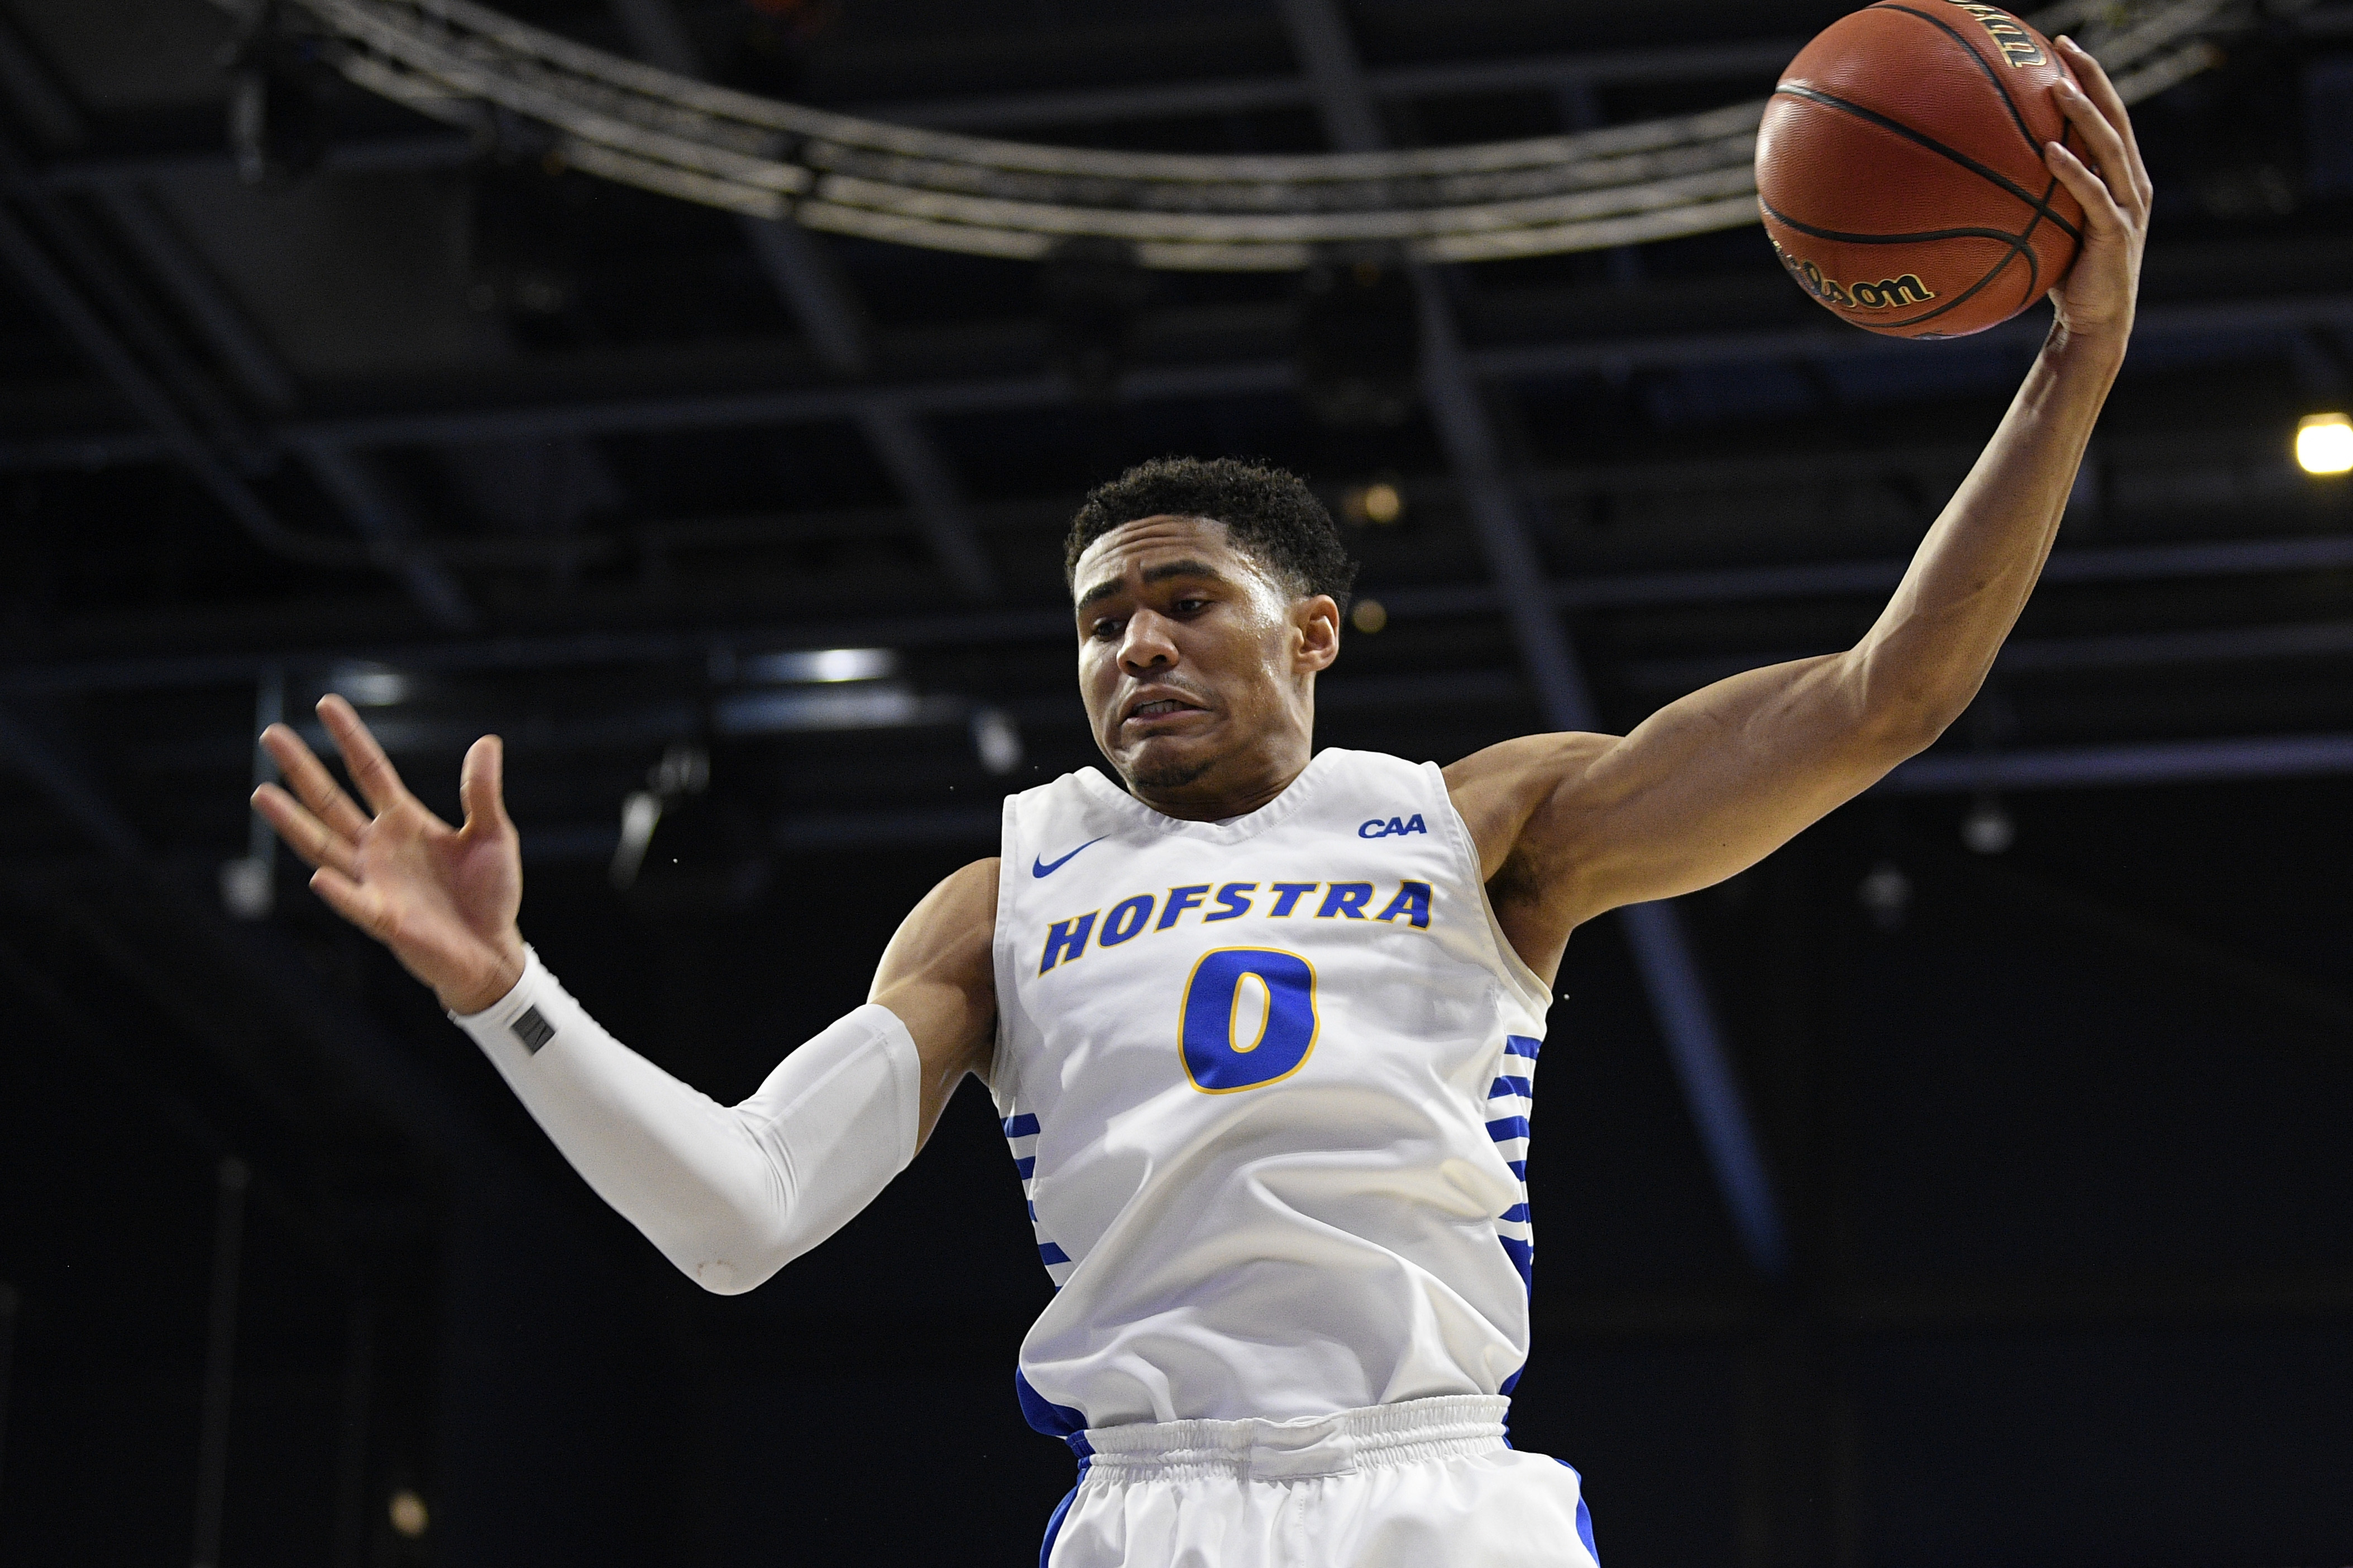 Hofstra returns to NCAA Tournament for first time since 2001